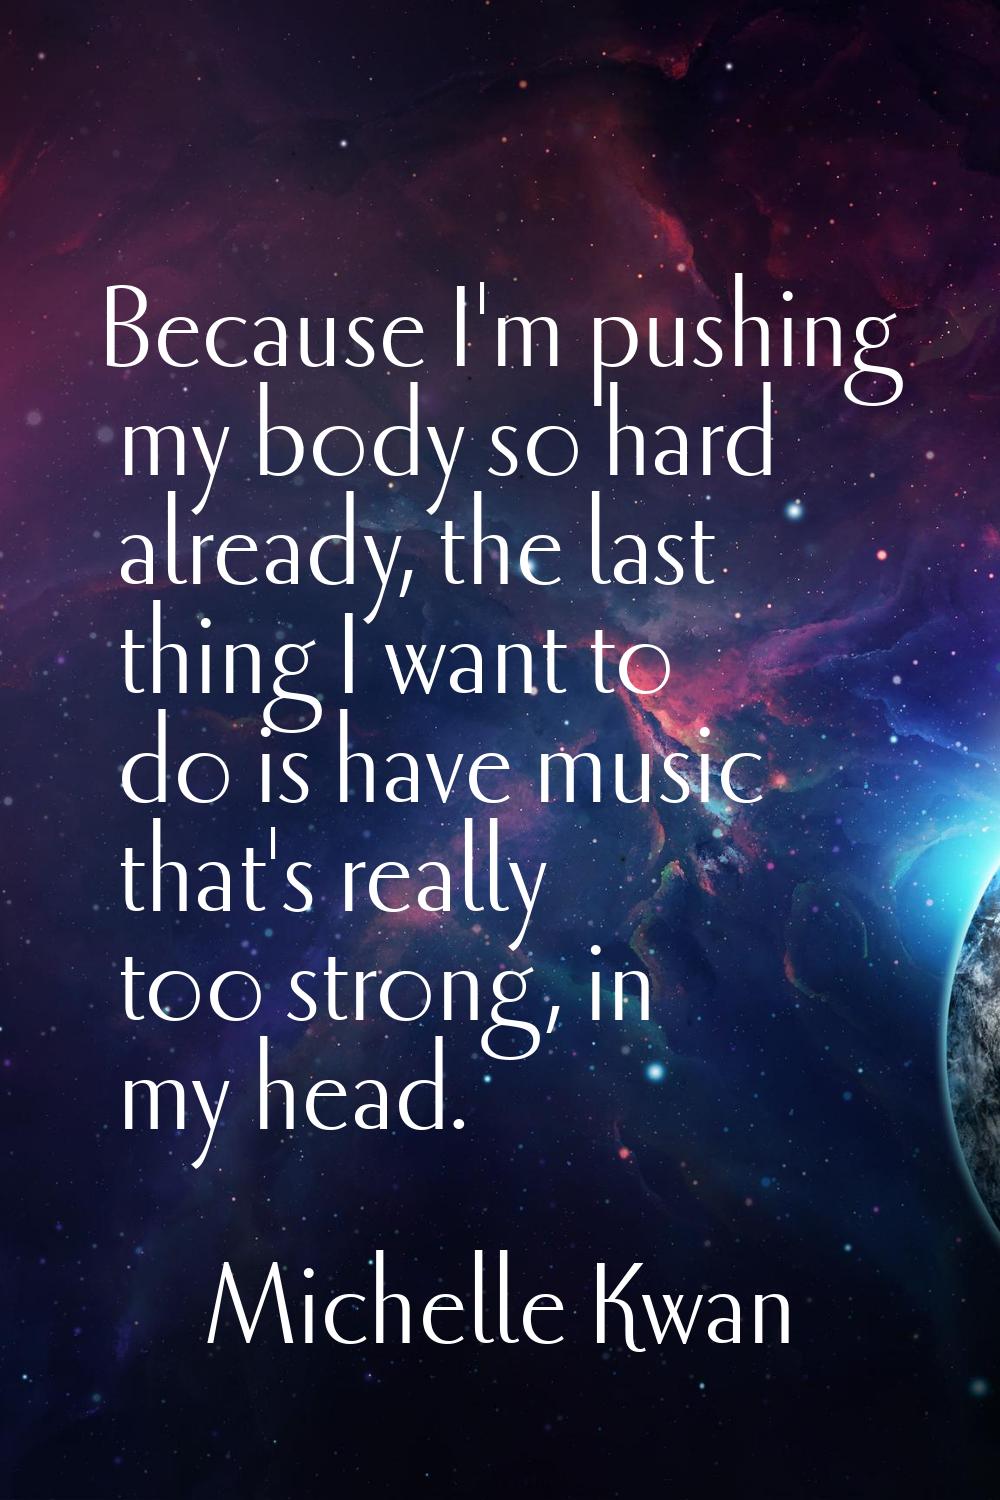 Because I'm pushing my body so hard already, the last thing I want to do is have music that's reall